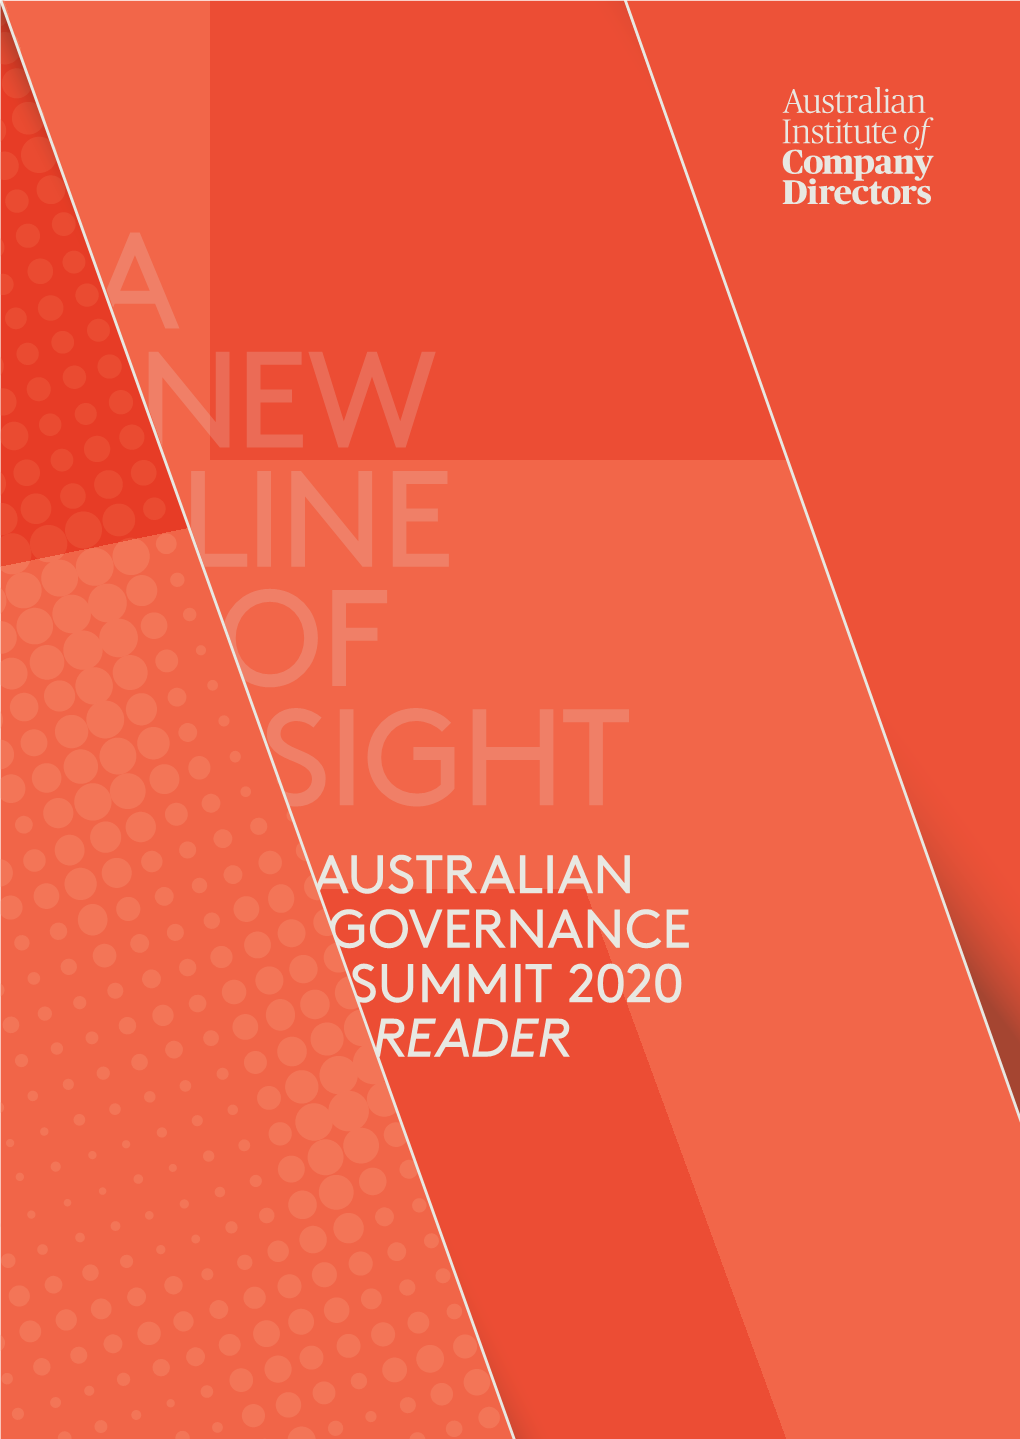 AUSTRALIAN GOVERNANCE SUMMIT 2020 READER the Australian Institute of Company Directors Is Committed to Strengthening Society Through World-Class Governance